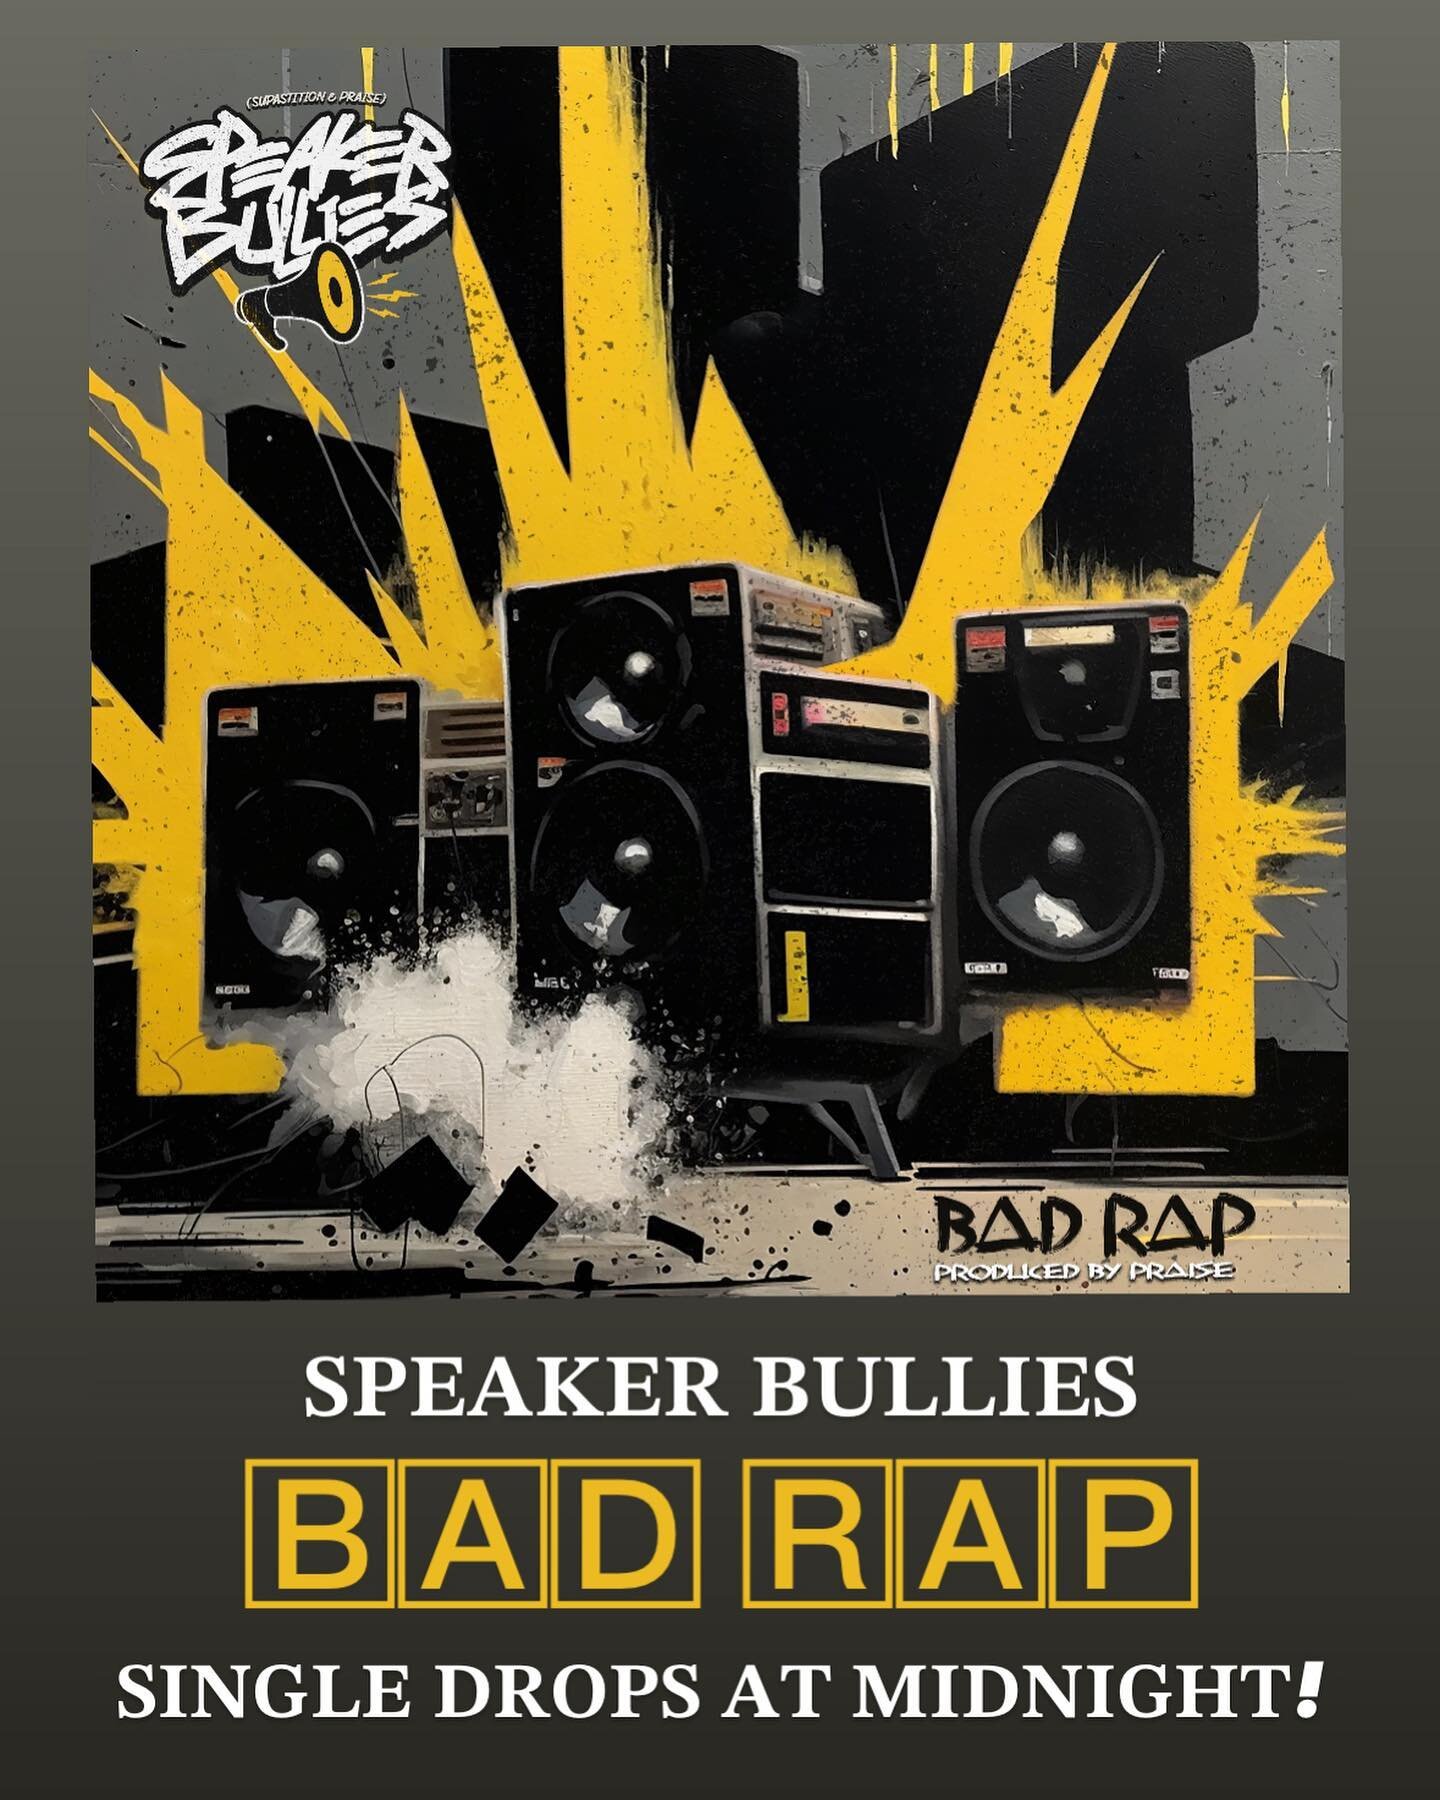 Supastition &amp; Praise are Speaker Bullies. The first single &ldquo;Bad Rap&rdquo; drops TONIGHT at midnight on all streaming platforms. Link in Bio.

The long awaited &ldquo;Art of Disrespect&rdquo; album will officially be released on 7/7/23. You